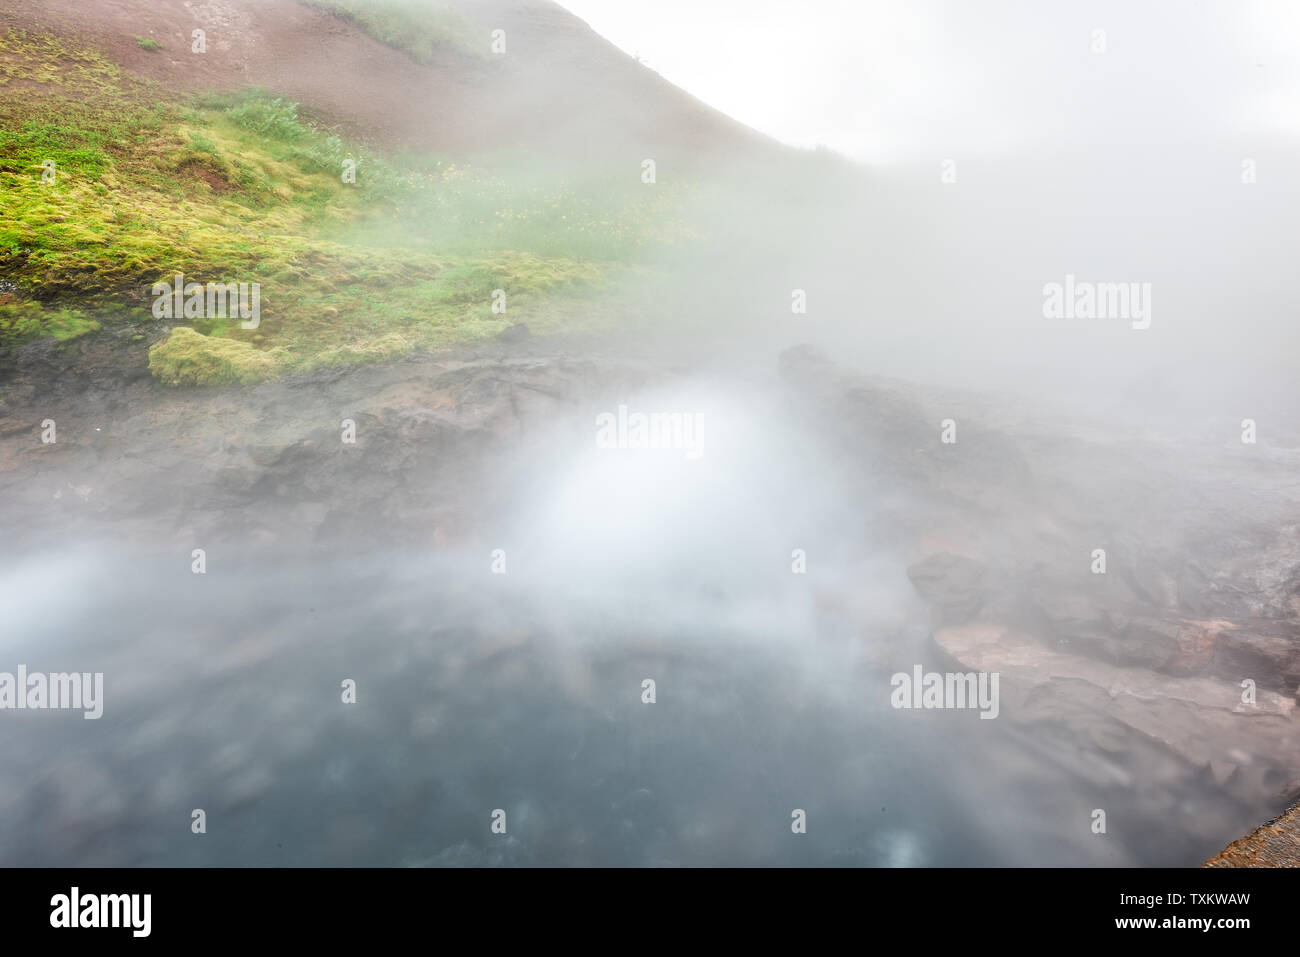 Closeup of steam geyser in Deildartunguhver hot springs in Iceland with long exposure cloudy mist fog coming out of cave boiling water vapor Stock Photo